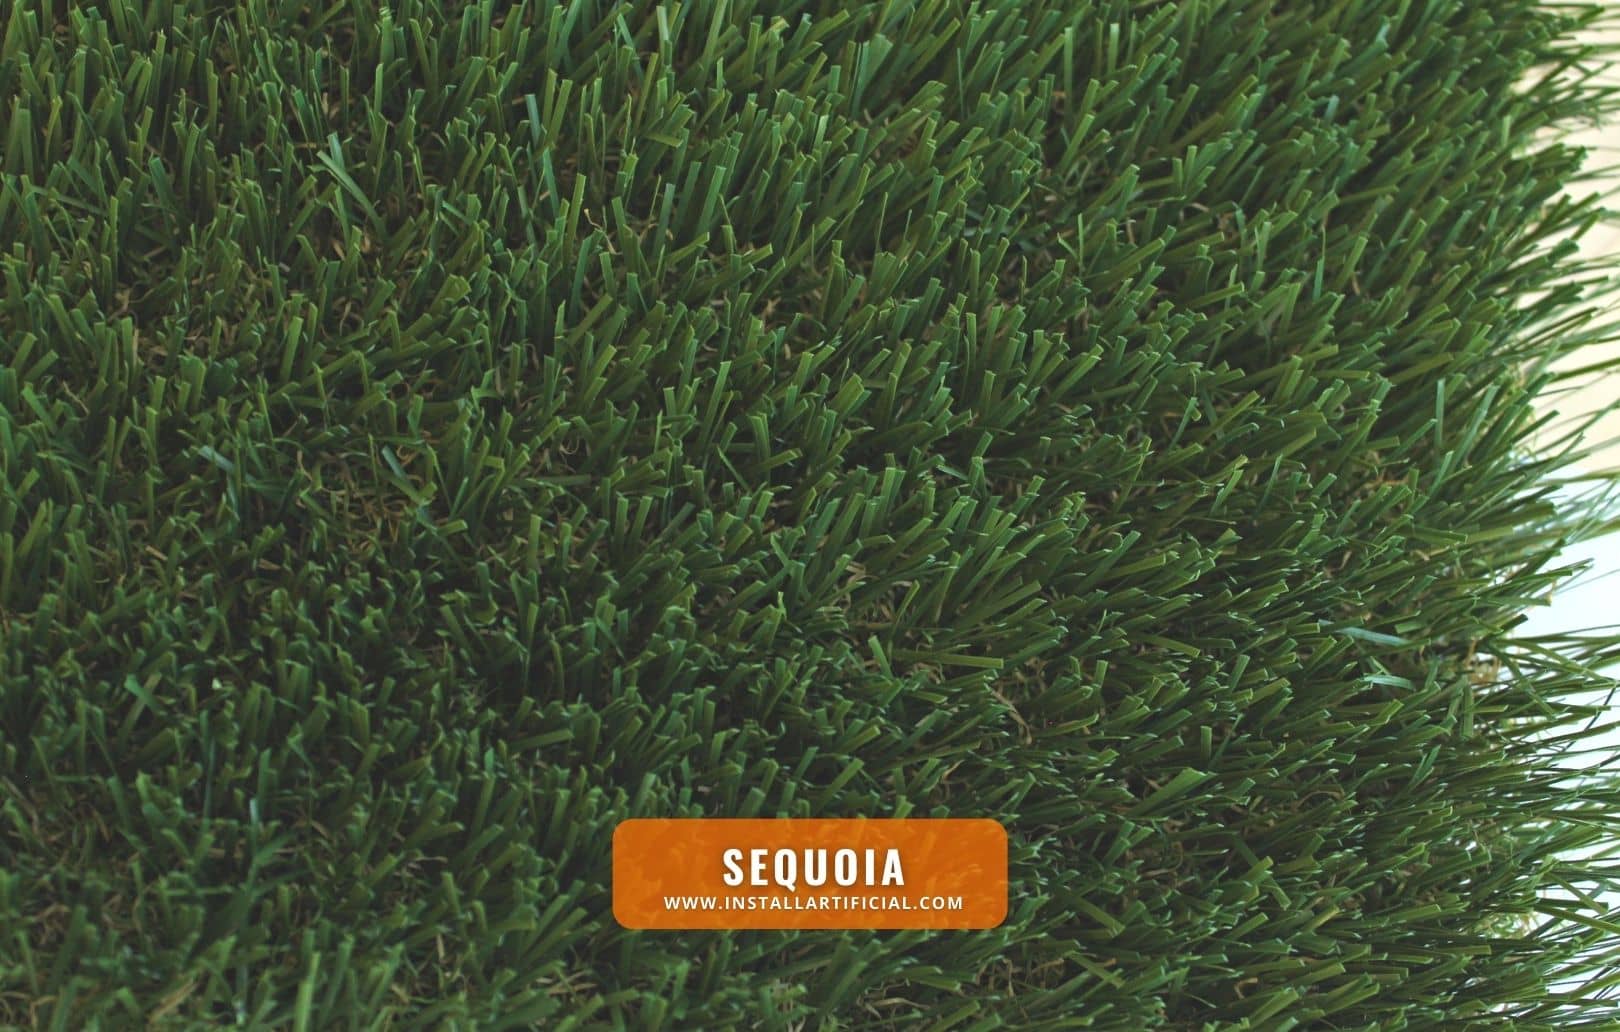 Sequoia, Synthetic Grass Warehouse, Everlast, top